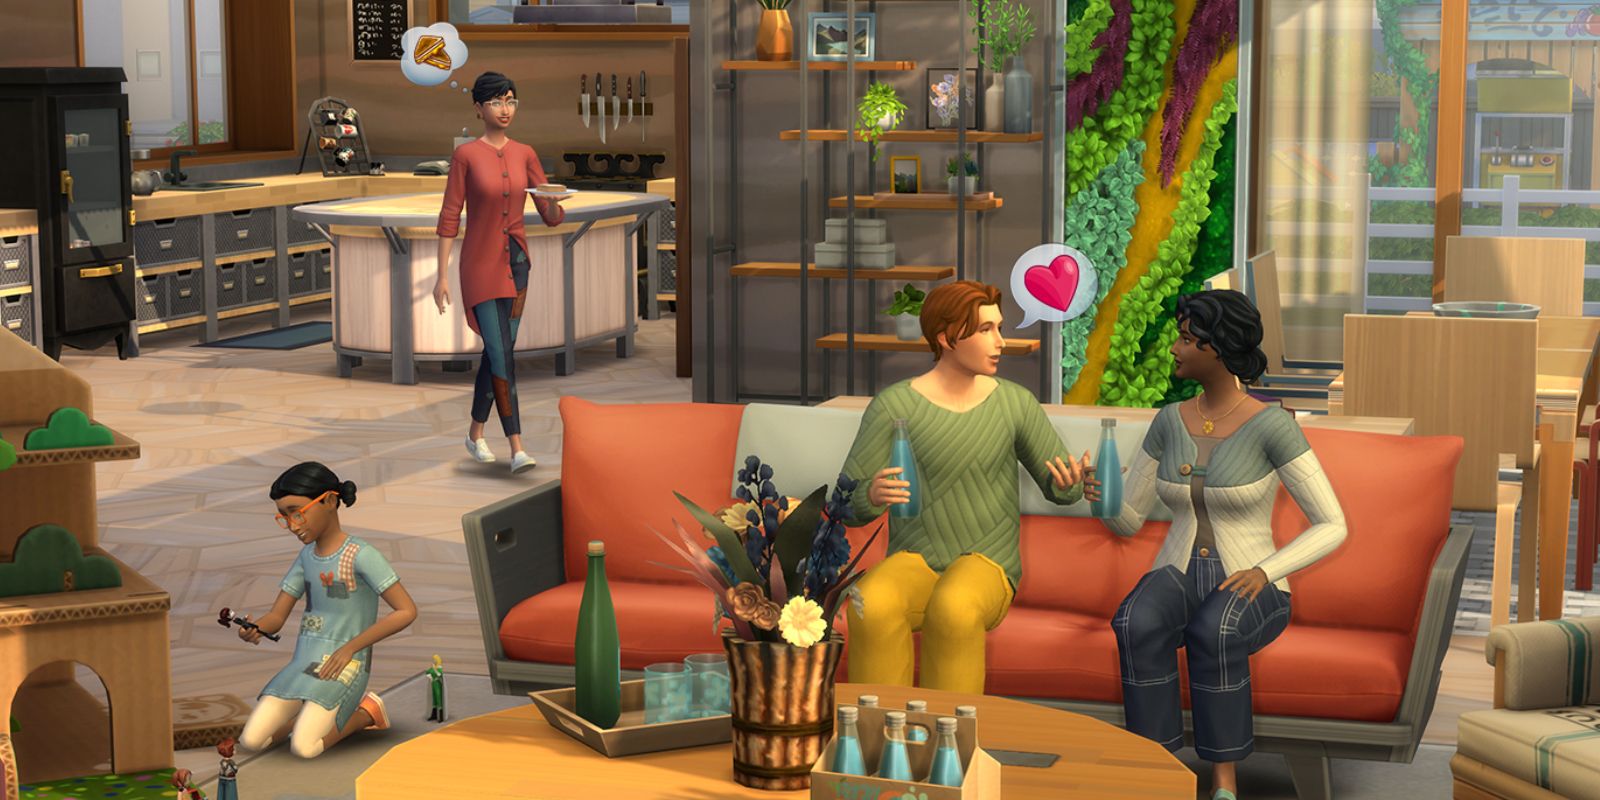 slice of life mod sims 4 period